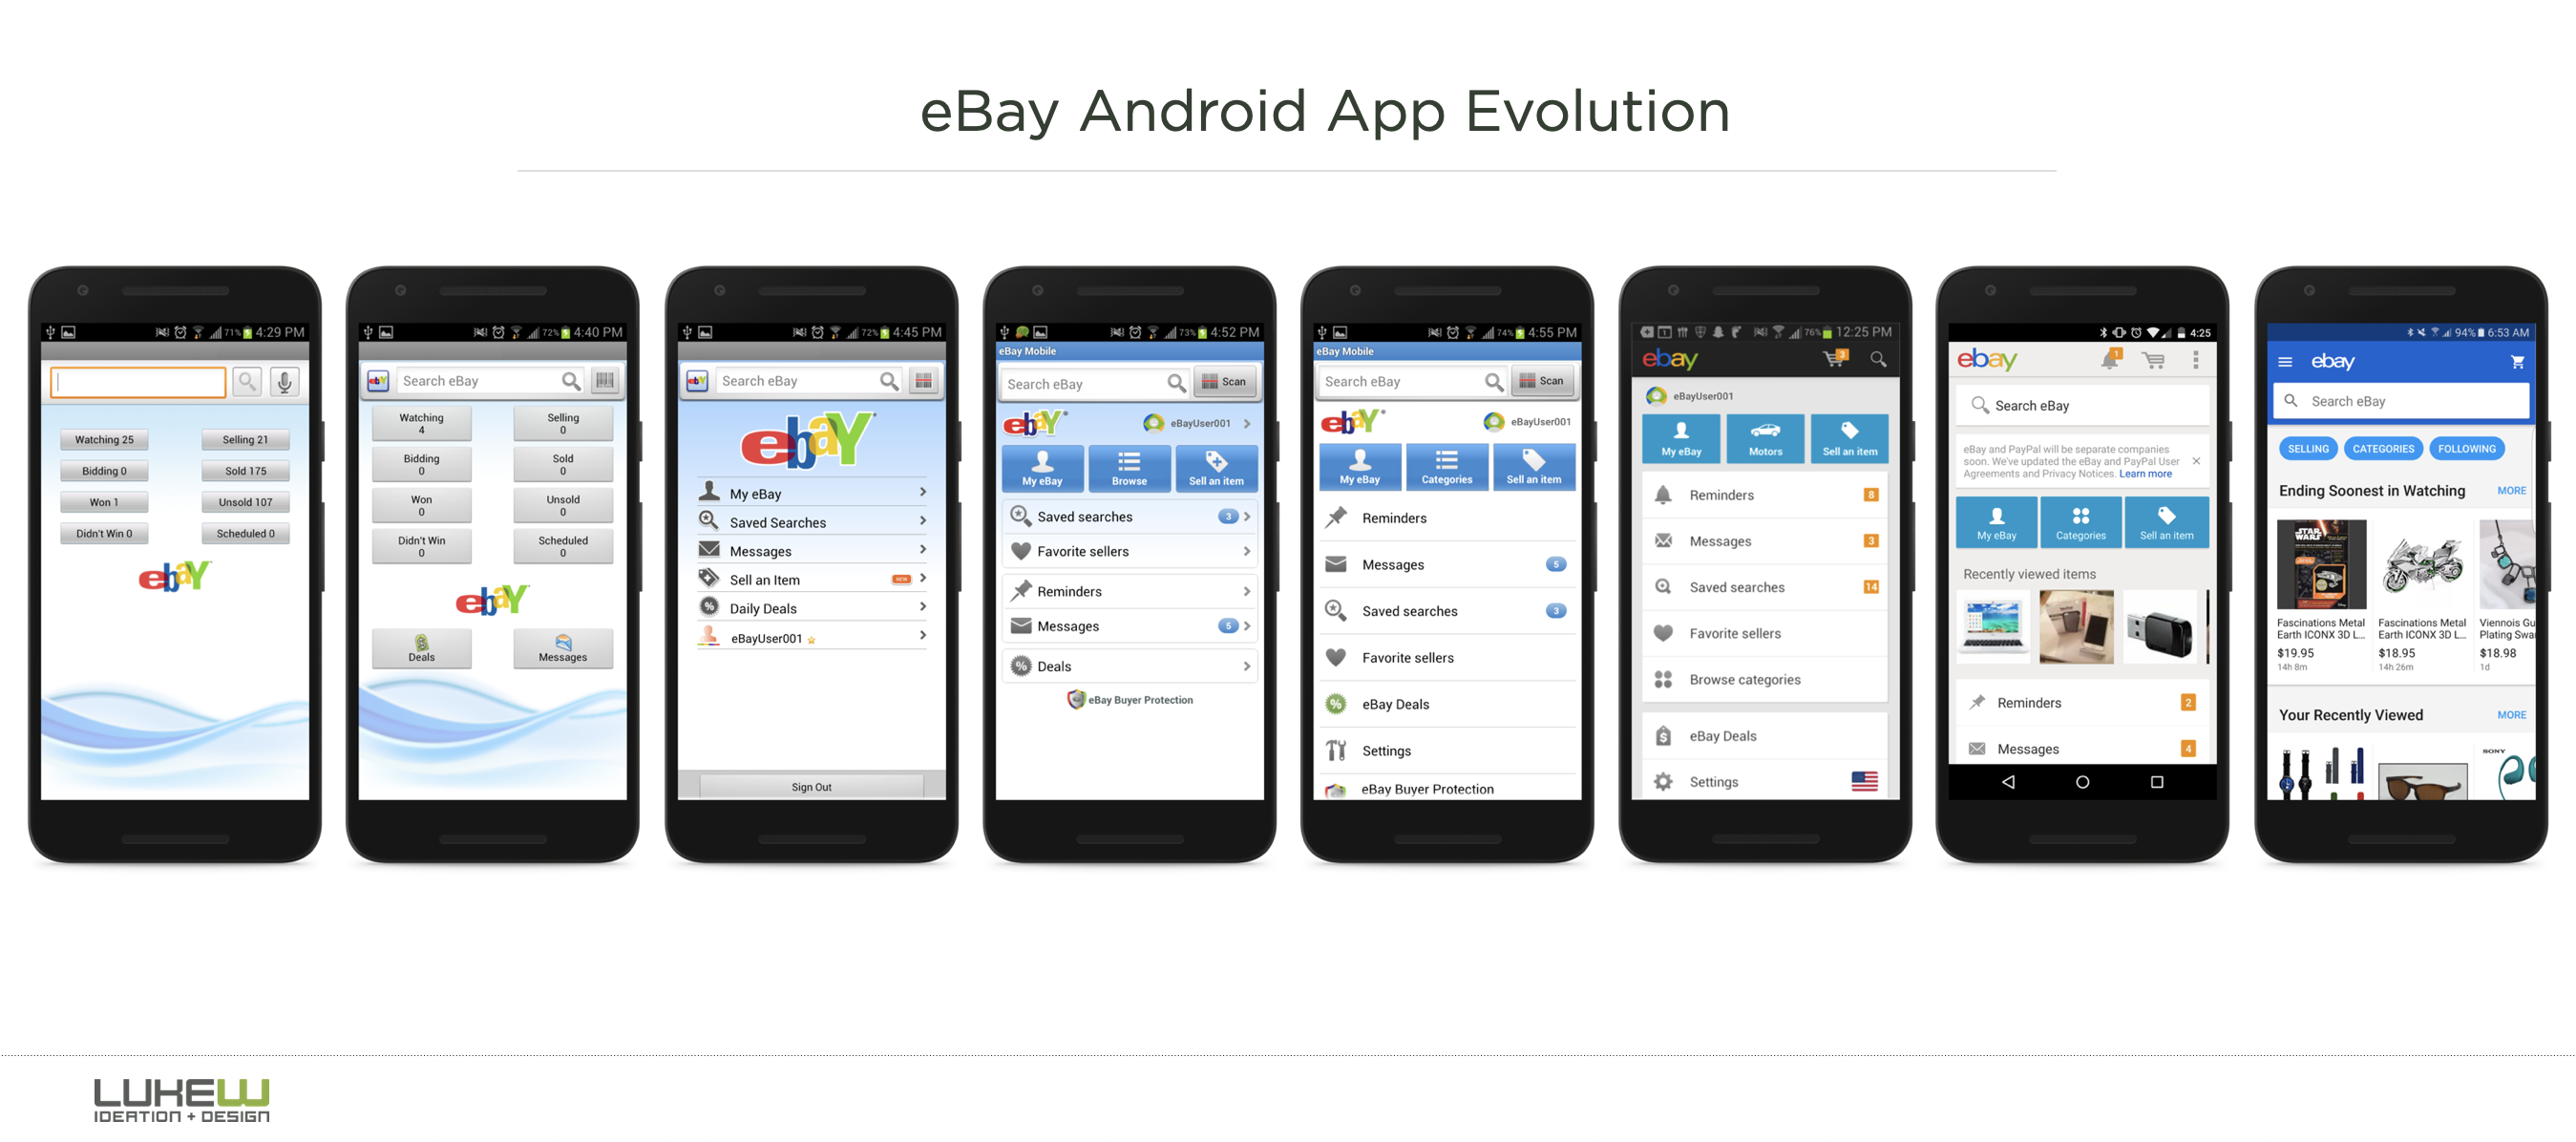 Design is never done: the eBay Android app edition